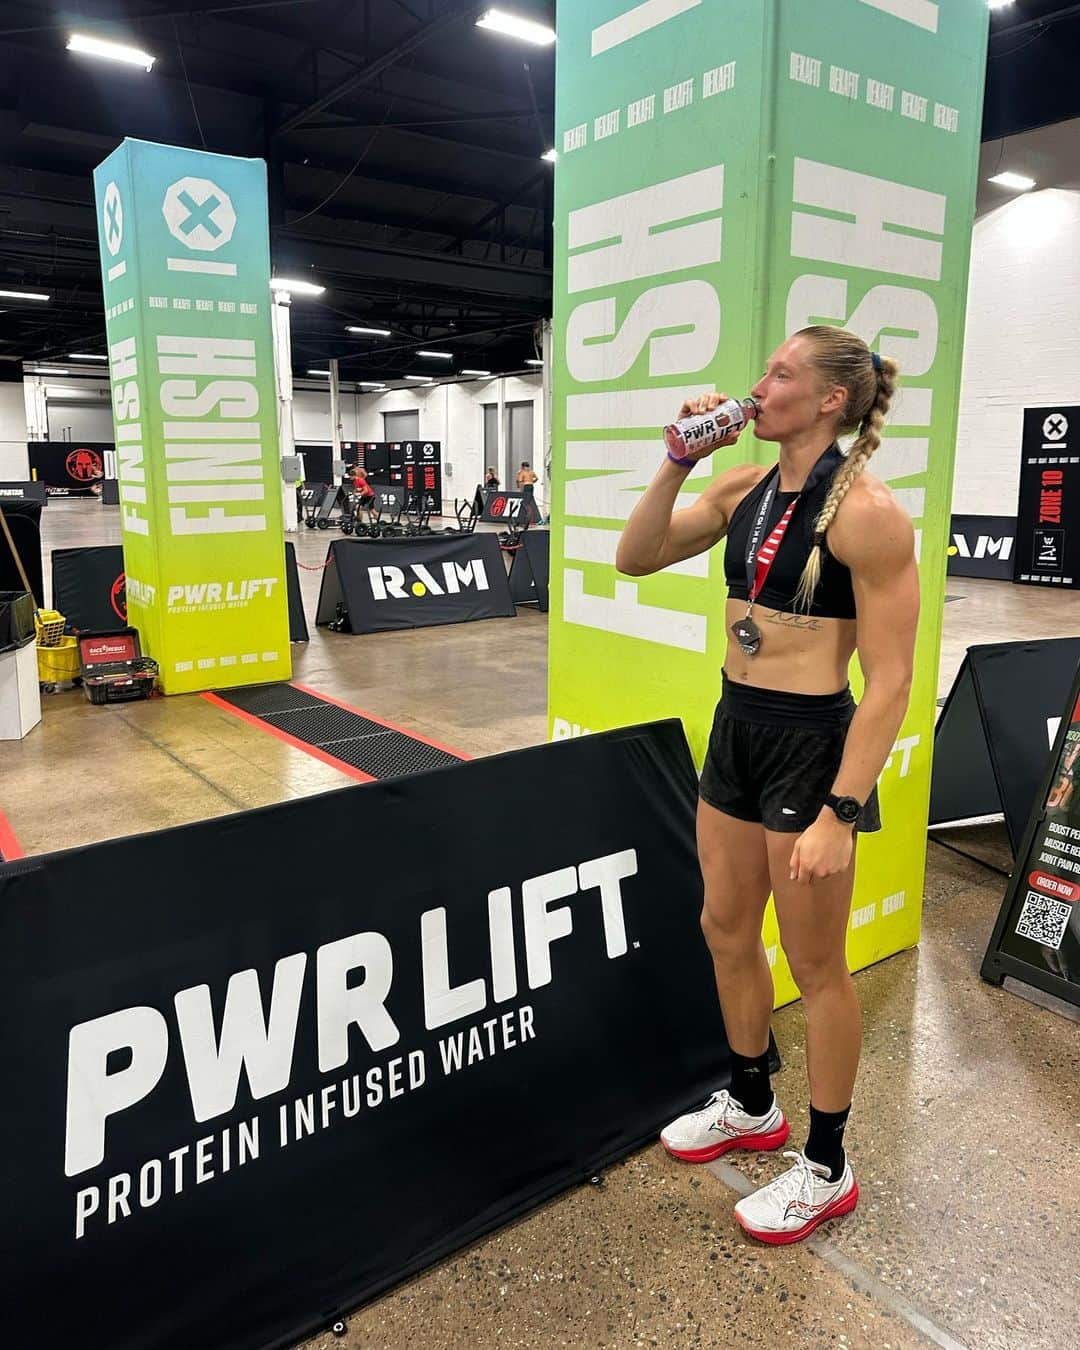 カーリー・ウォパットのインスタグラム：「First Deka Fit! Didn’t die ✔️  Qualified for World Championships ✔️  Drank a @drinkpwrlift ✔️ Or 3.. Ran up the “Rocky steps” ✔️   That means.. the @deka.fit World Championship trifecta has been achieved! 🔥 After yesterday’s Northeast Deka Fit performance, I have officially qualified for all three World Championship races in December (top 20 qualify). That’s where the real battles will go down! ⚔️  Current rankings: 1st in Deka Strong - 11:55 (WR)  6th in Deka Mile - 20:30 13th in Deka Fit - 35:41  Each race consists of 10 functional fitness zones. The Strong is just the zones, the Mile includes 1 mile of running, and the Fit includes 5k.   Happy with my performance, and grateful that I got to toe the line with such a stacked field of ladies! 💪🏼 I always love the hype of a heated competition. And the element of racing head to head fires me up.   Going in to this, I built a solid game plan with  @geigercoaching. I played my pacing a little conservative, which allowed me to hit the assault bike HARD for a top zone time of 1:27. From then on, I was able to pick up the pace, and pass up some competitors to finish 7th in my heat. It took patience to run my own race, but holding back until it was my time to step on the gas pedal payed off. Executed the game plan! And now we have the info to modify it.   Overall, Deka Fit is a race largely dominated by running. Strength and zone work are in my wheelhouse, so the area where I can make the most improvement is still running.  I’ve been training to build my running & endurance for 4 months now. Lots of progress made! More to come.   Thank you @yancyculp, judges, volunteers, and all others who helped run the event! See you all in December.」